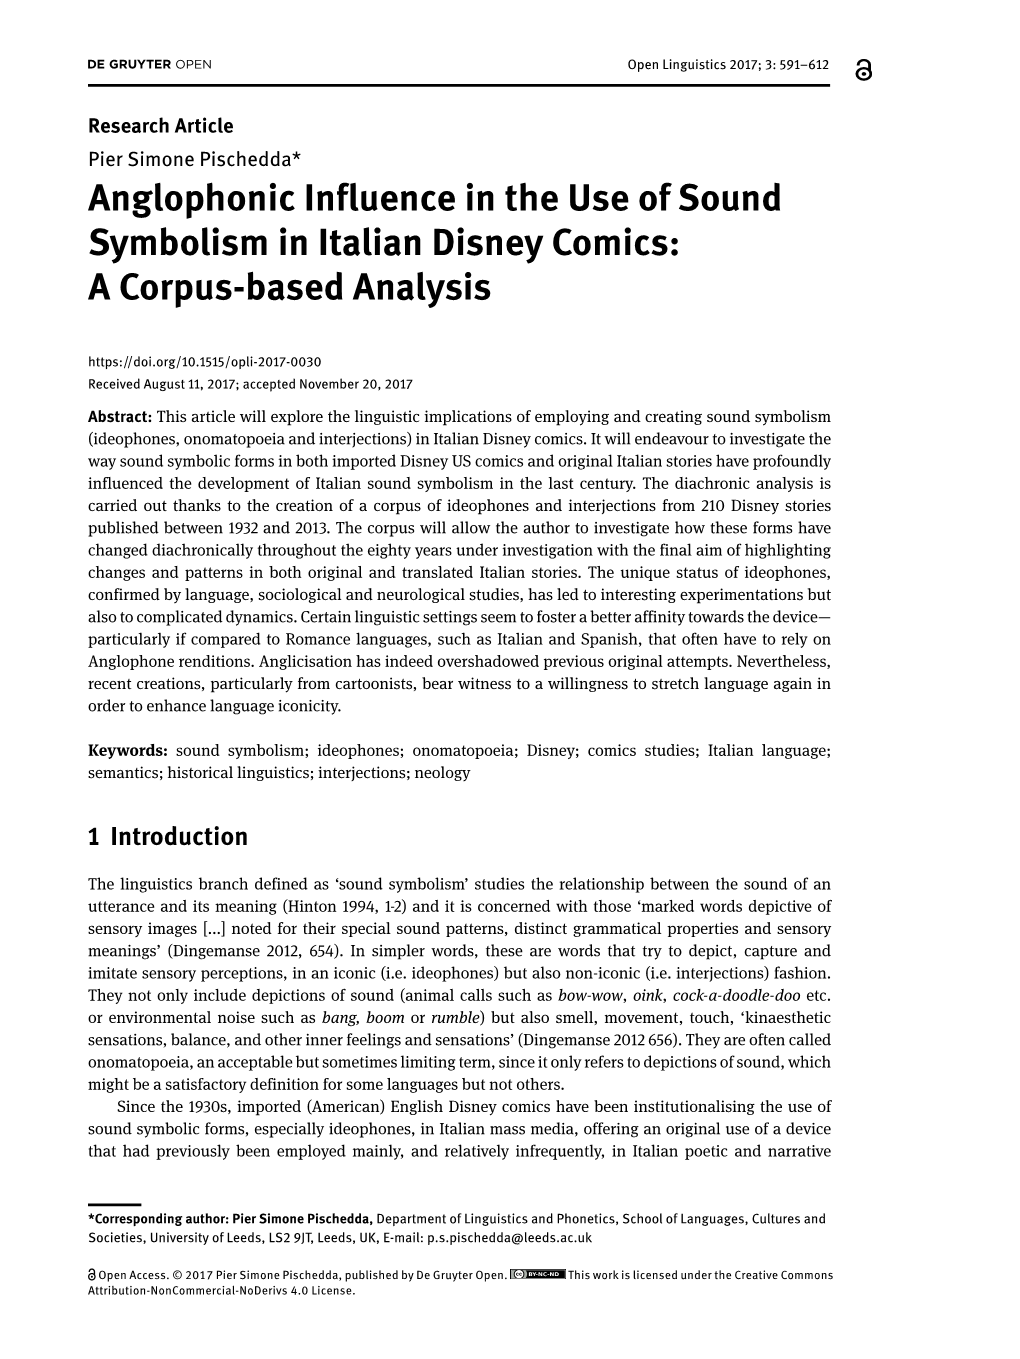 Anglophonic Influence in the Use of Sound Symbolism in Italian Disney Comics: a Corpus-Based Analysis